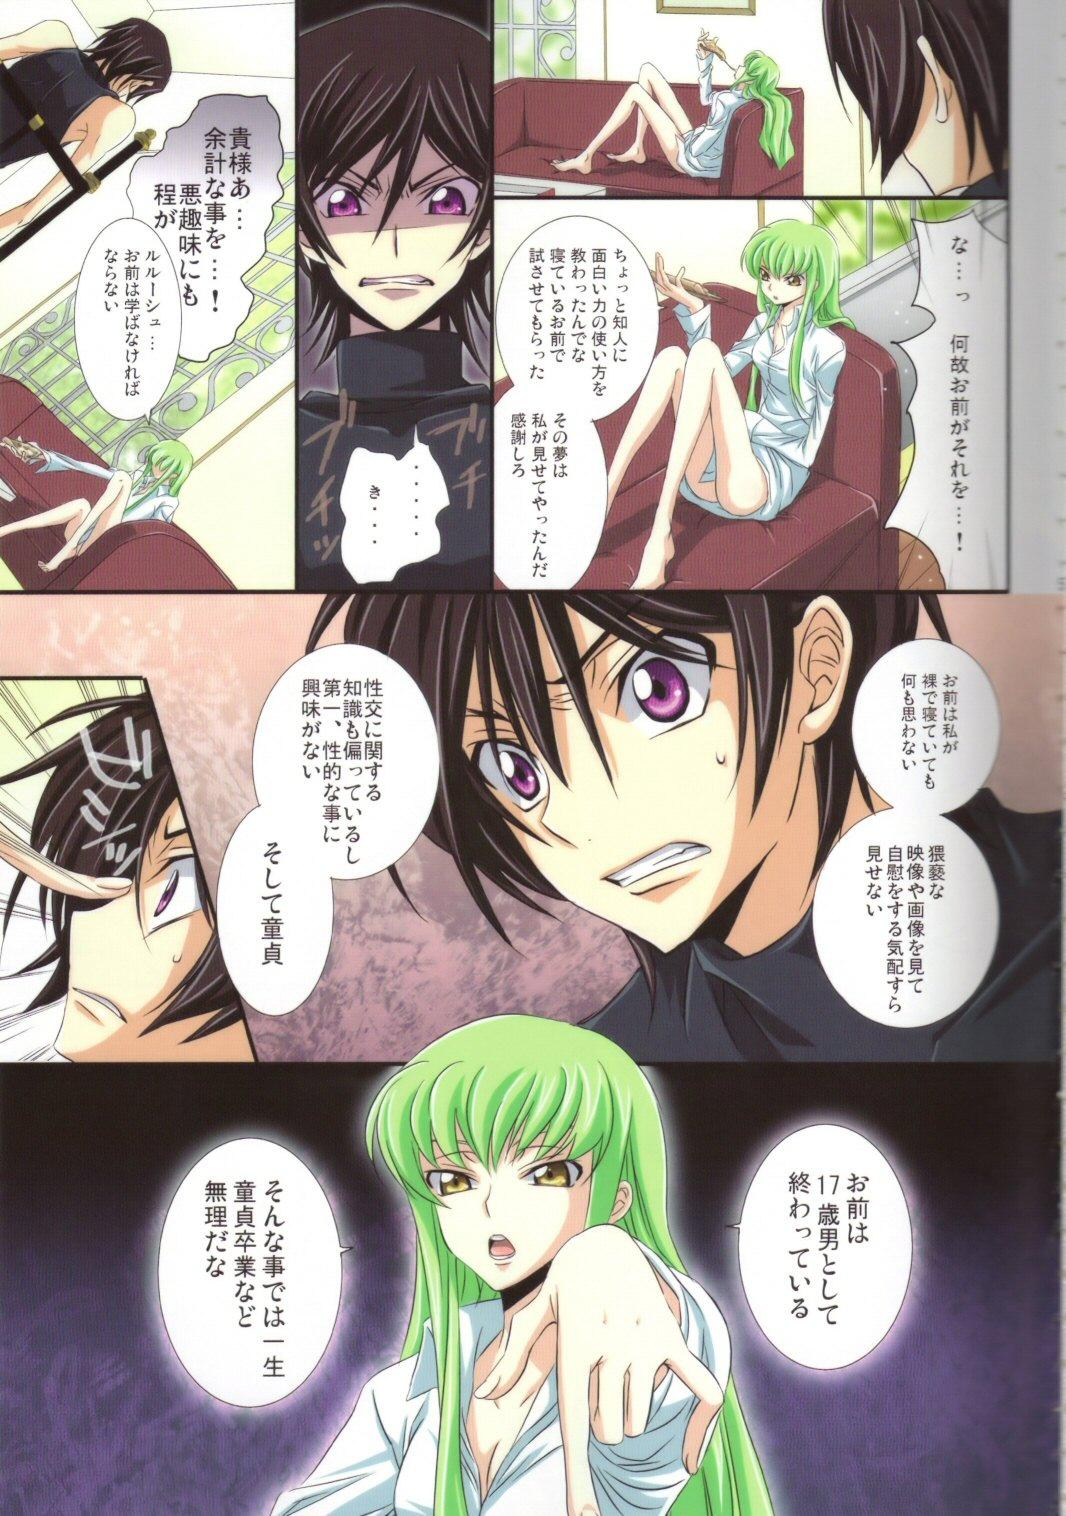 Tanga on・non・om - Code geass Perfect Porn - Page 4